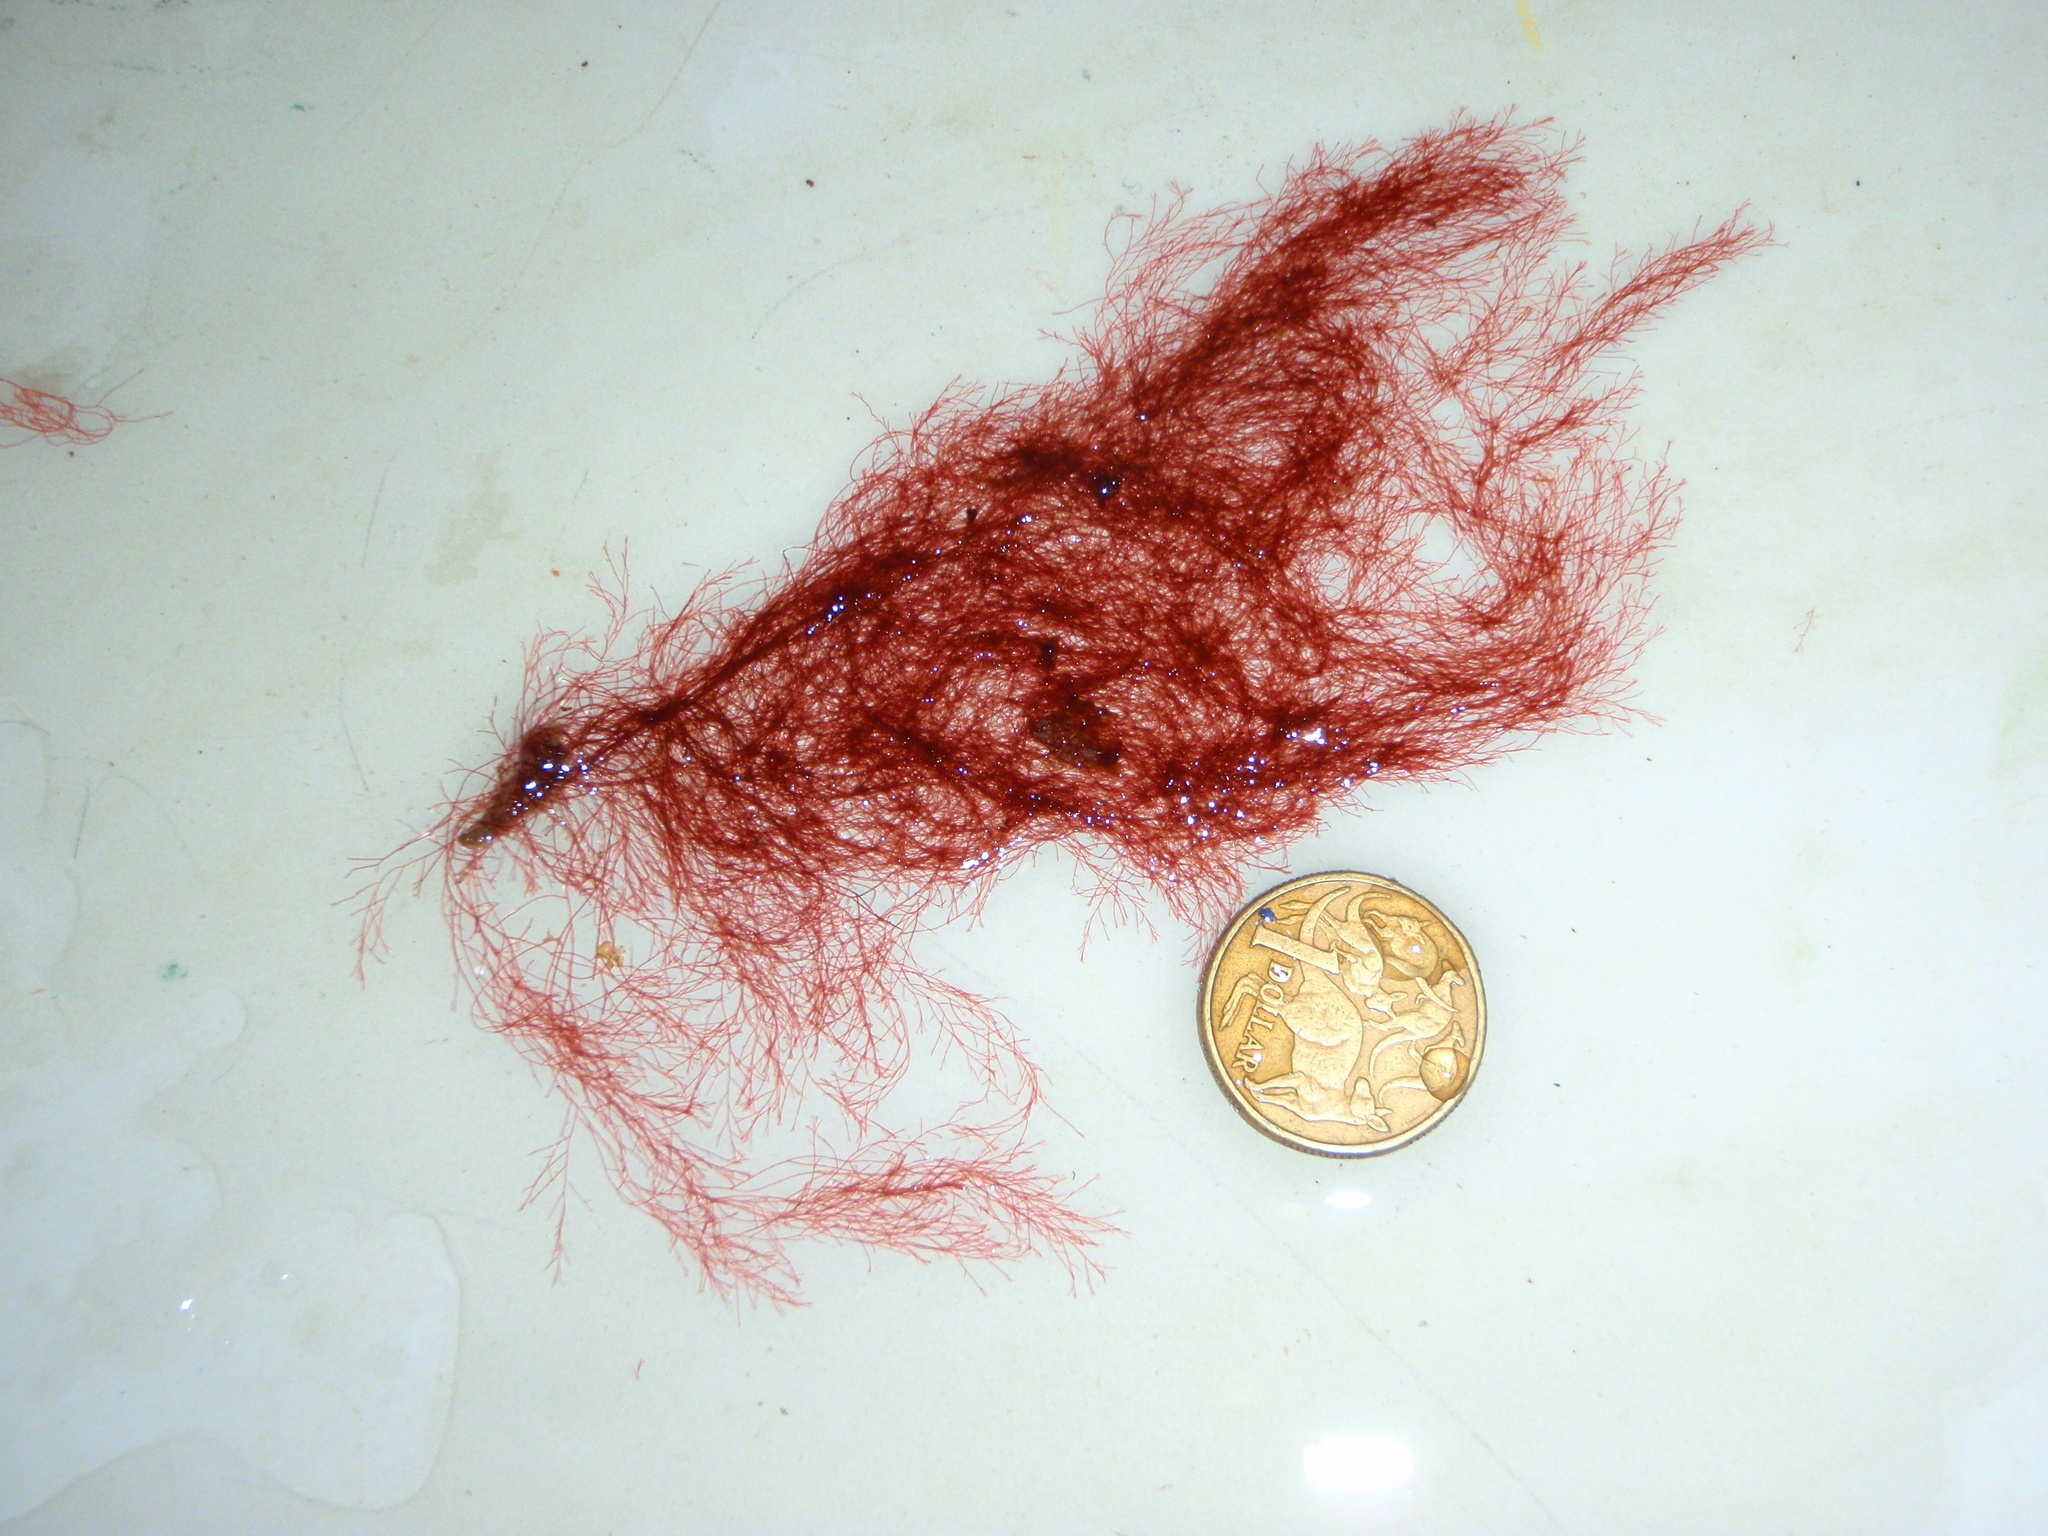 A red algal thallus next to a coin for size. The thallus is perhaps 5x the length of the coin.